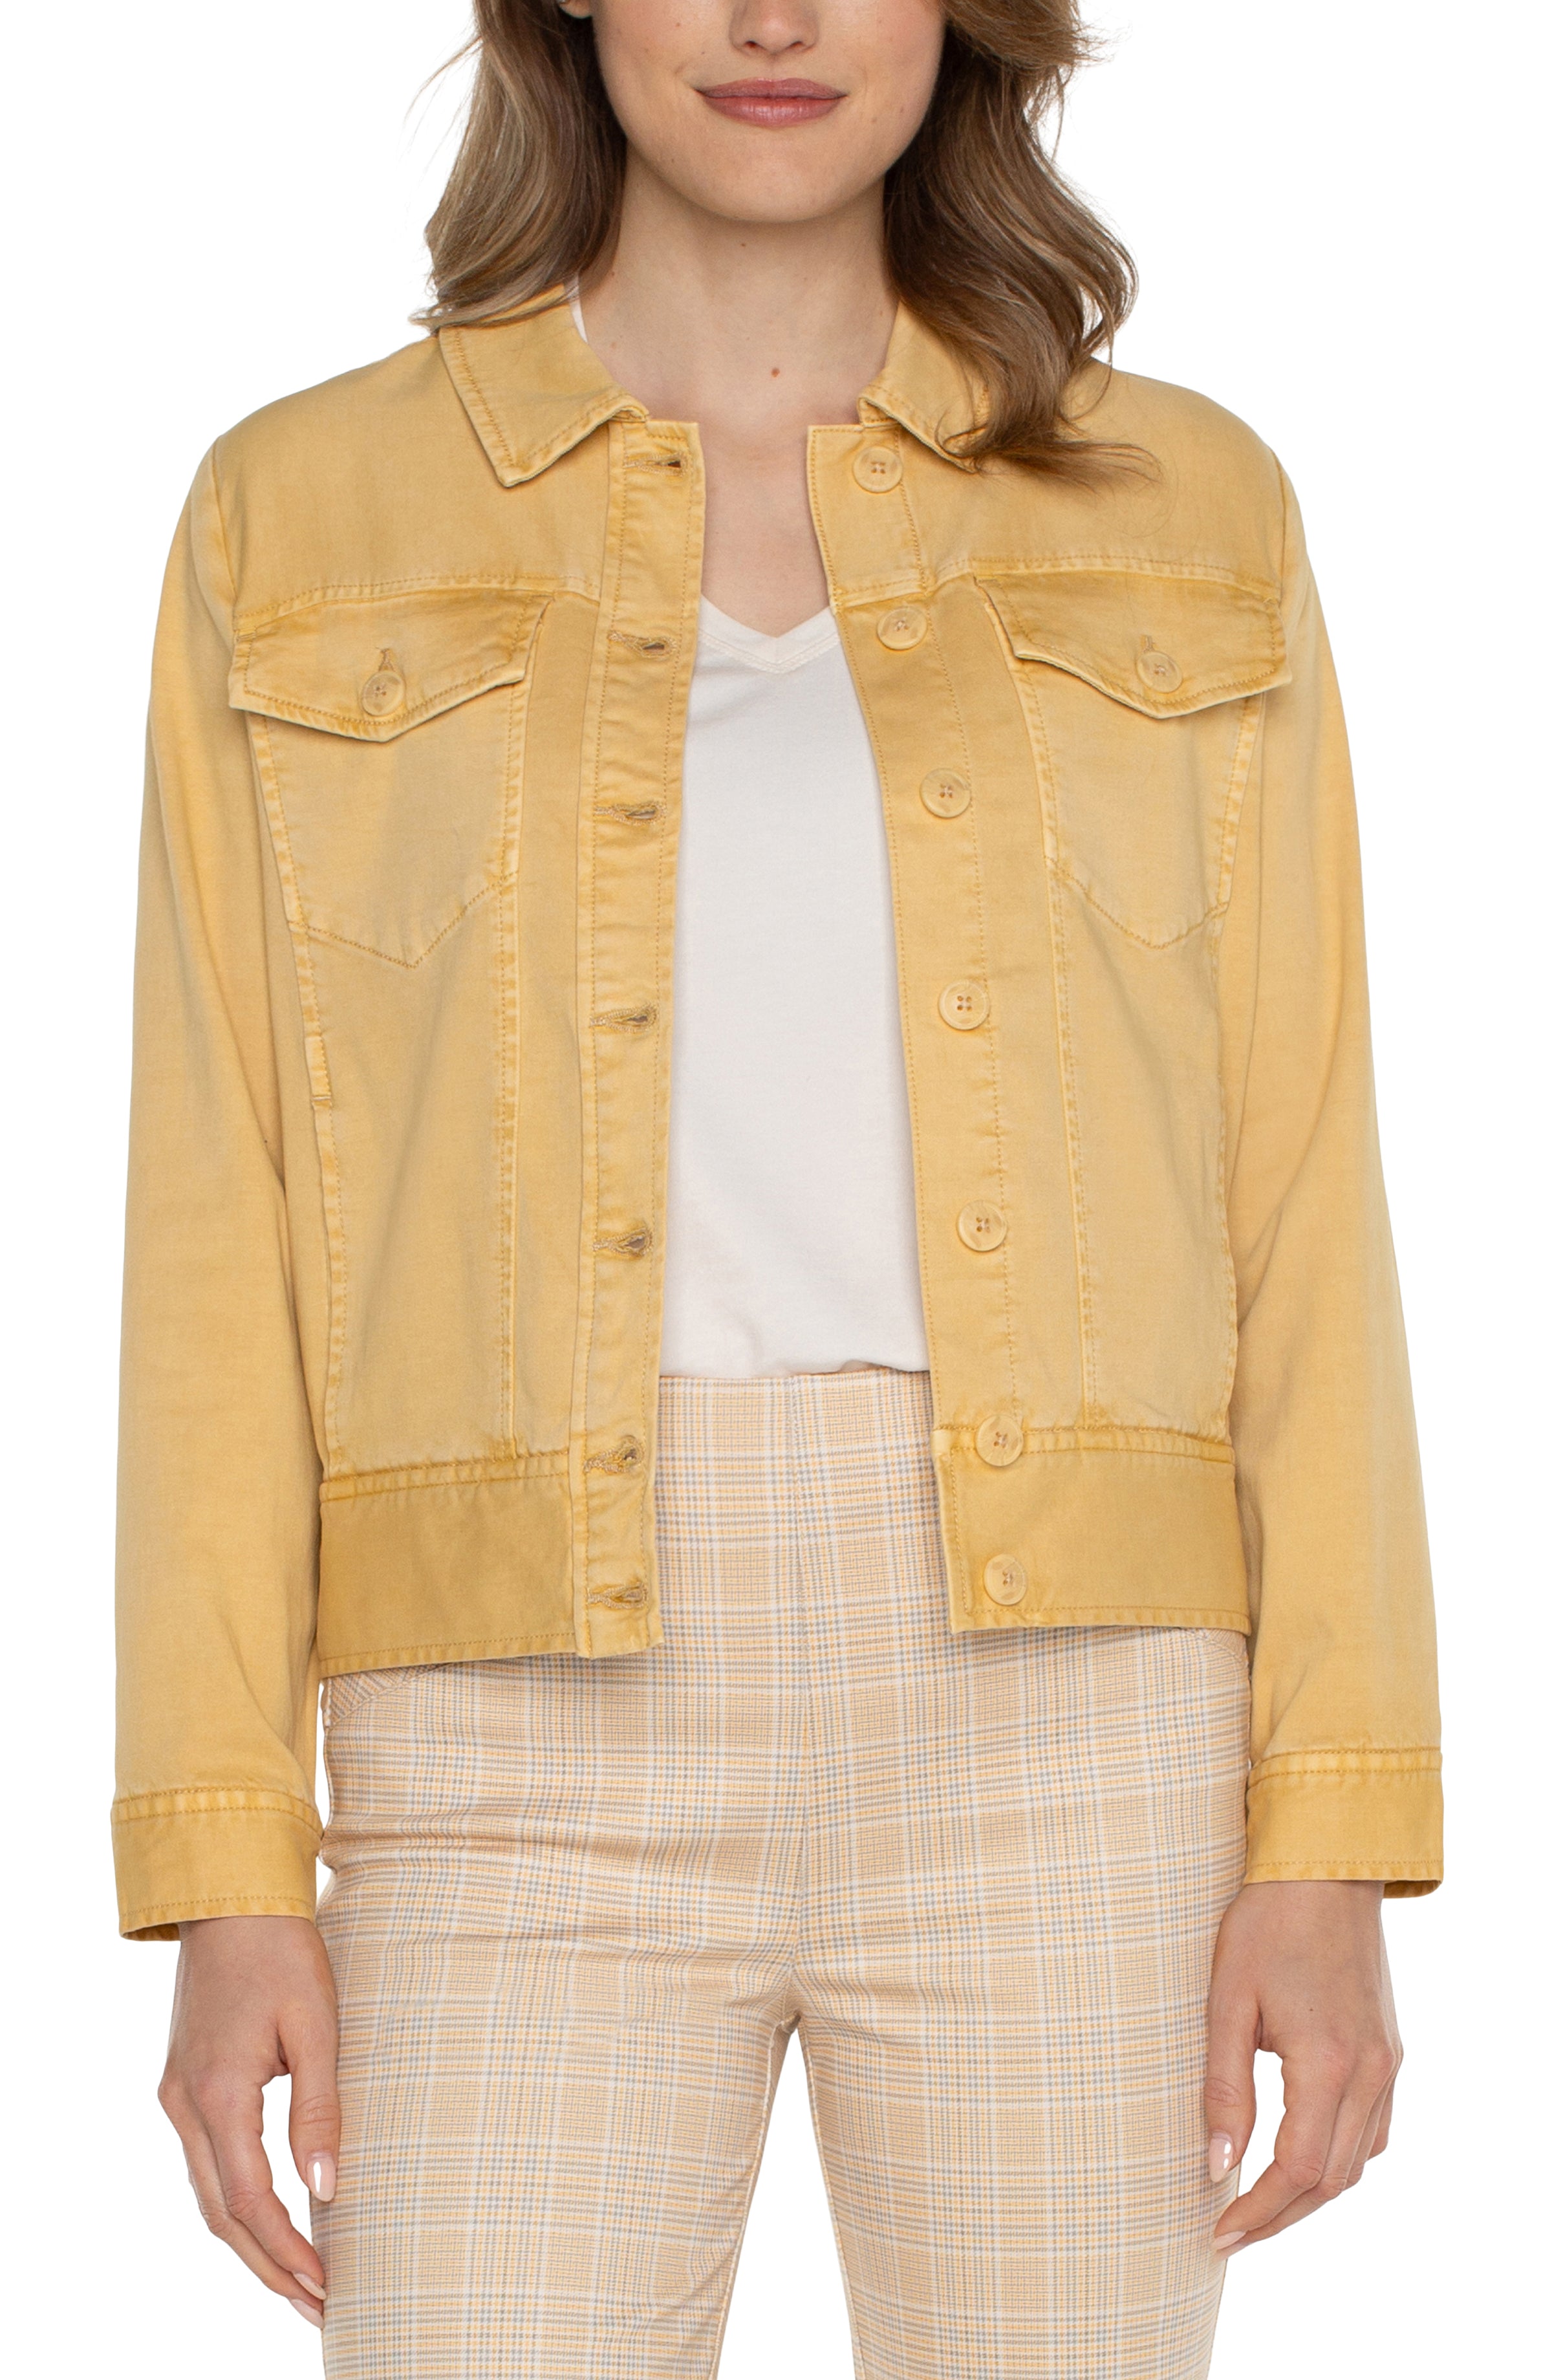 LVP Trucker Jacket with Elastic Back - Flaxen Gold Front View